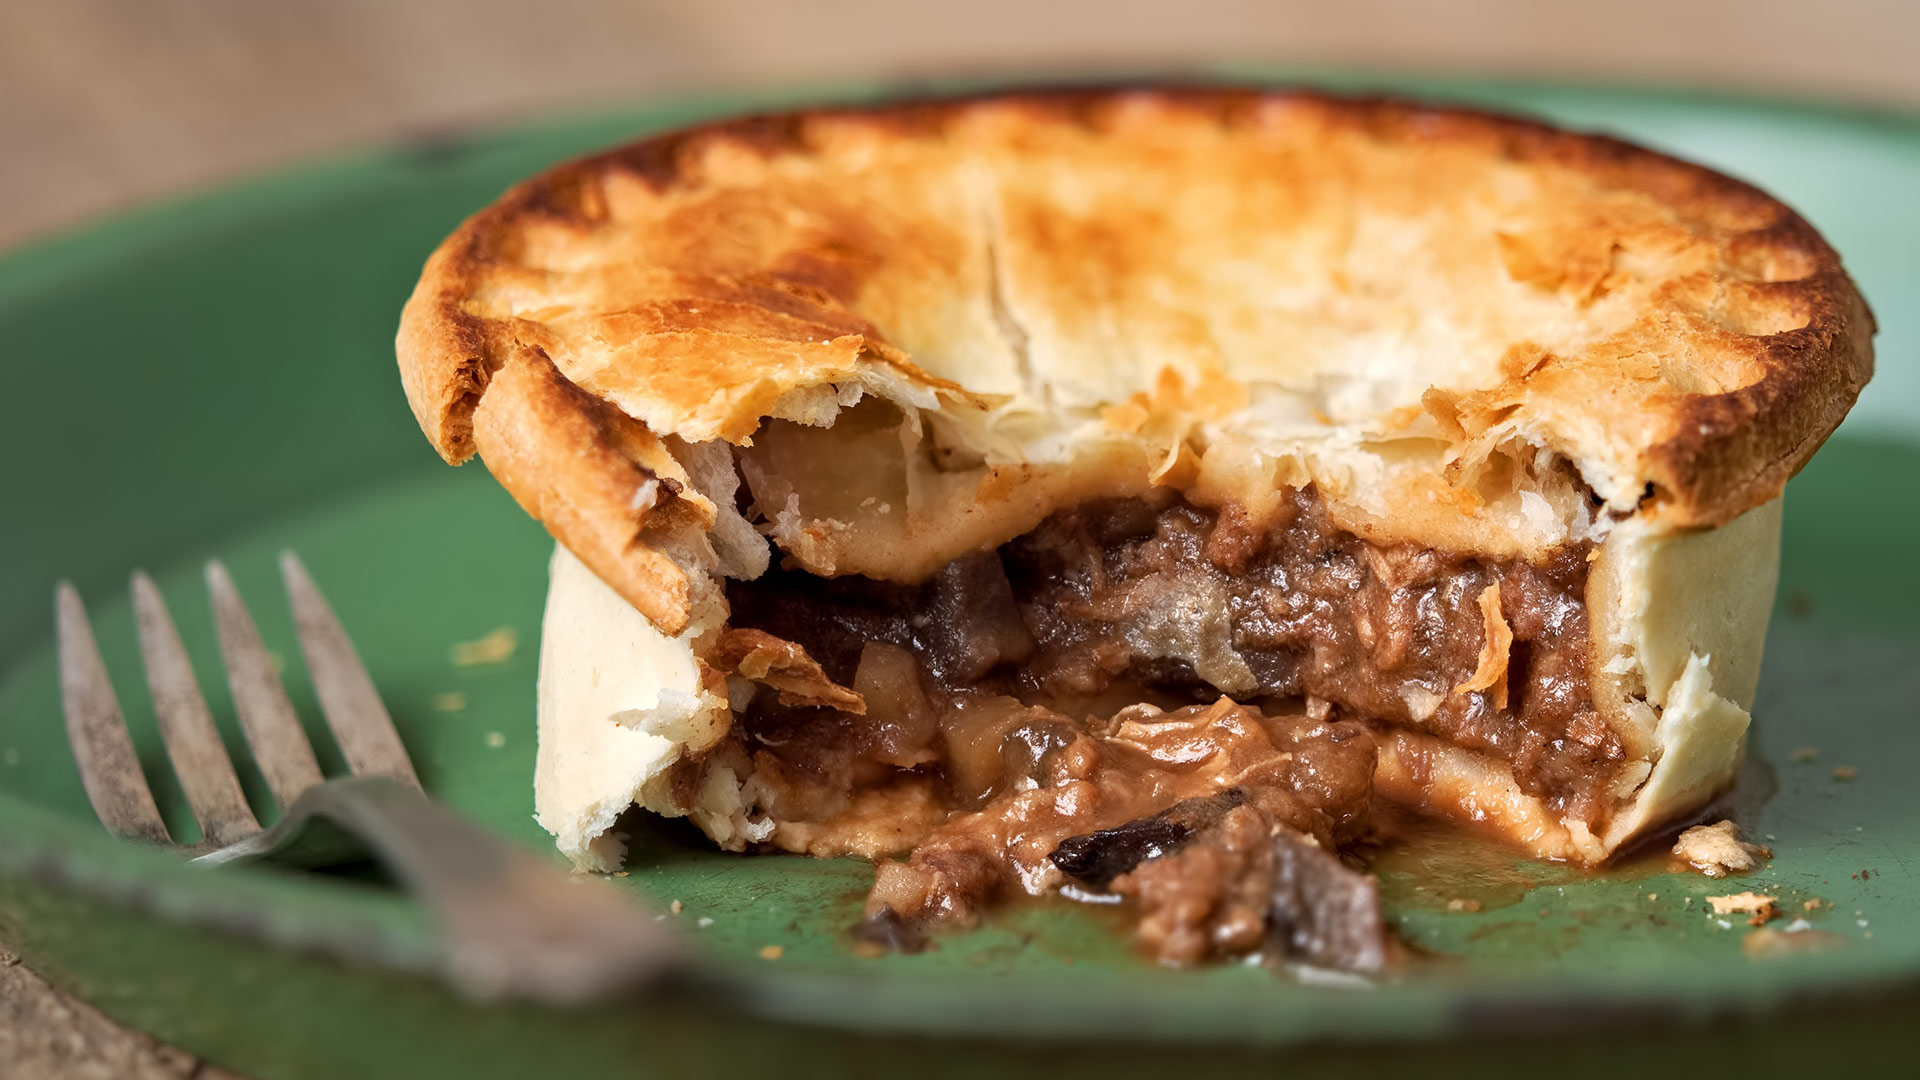 No question! These Australia's 12 best meat pies - Wotif Insider